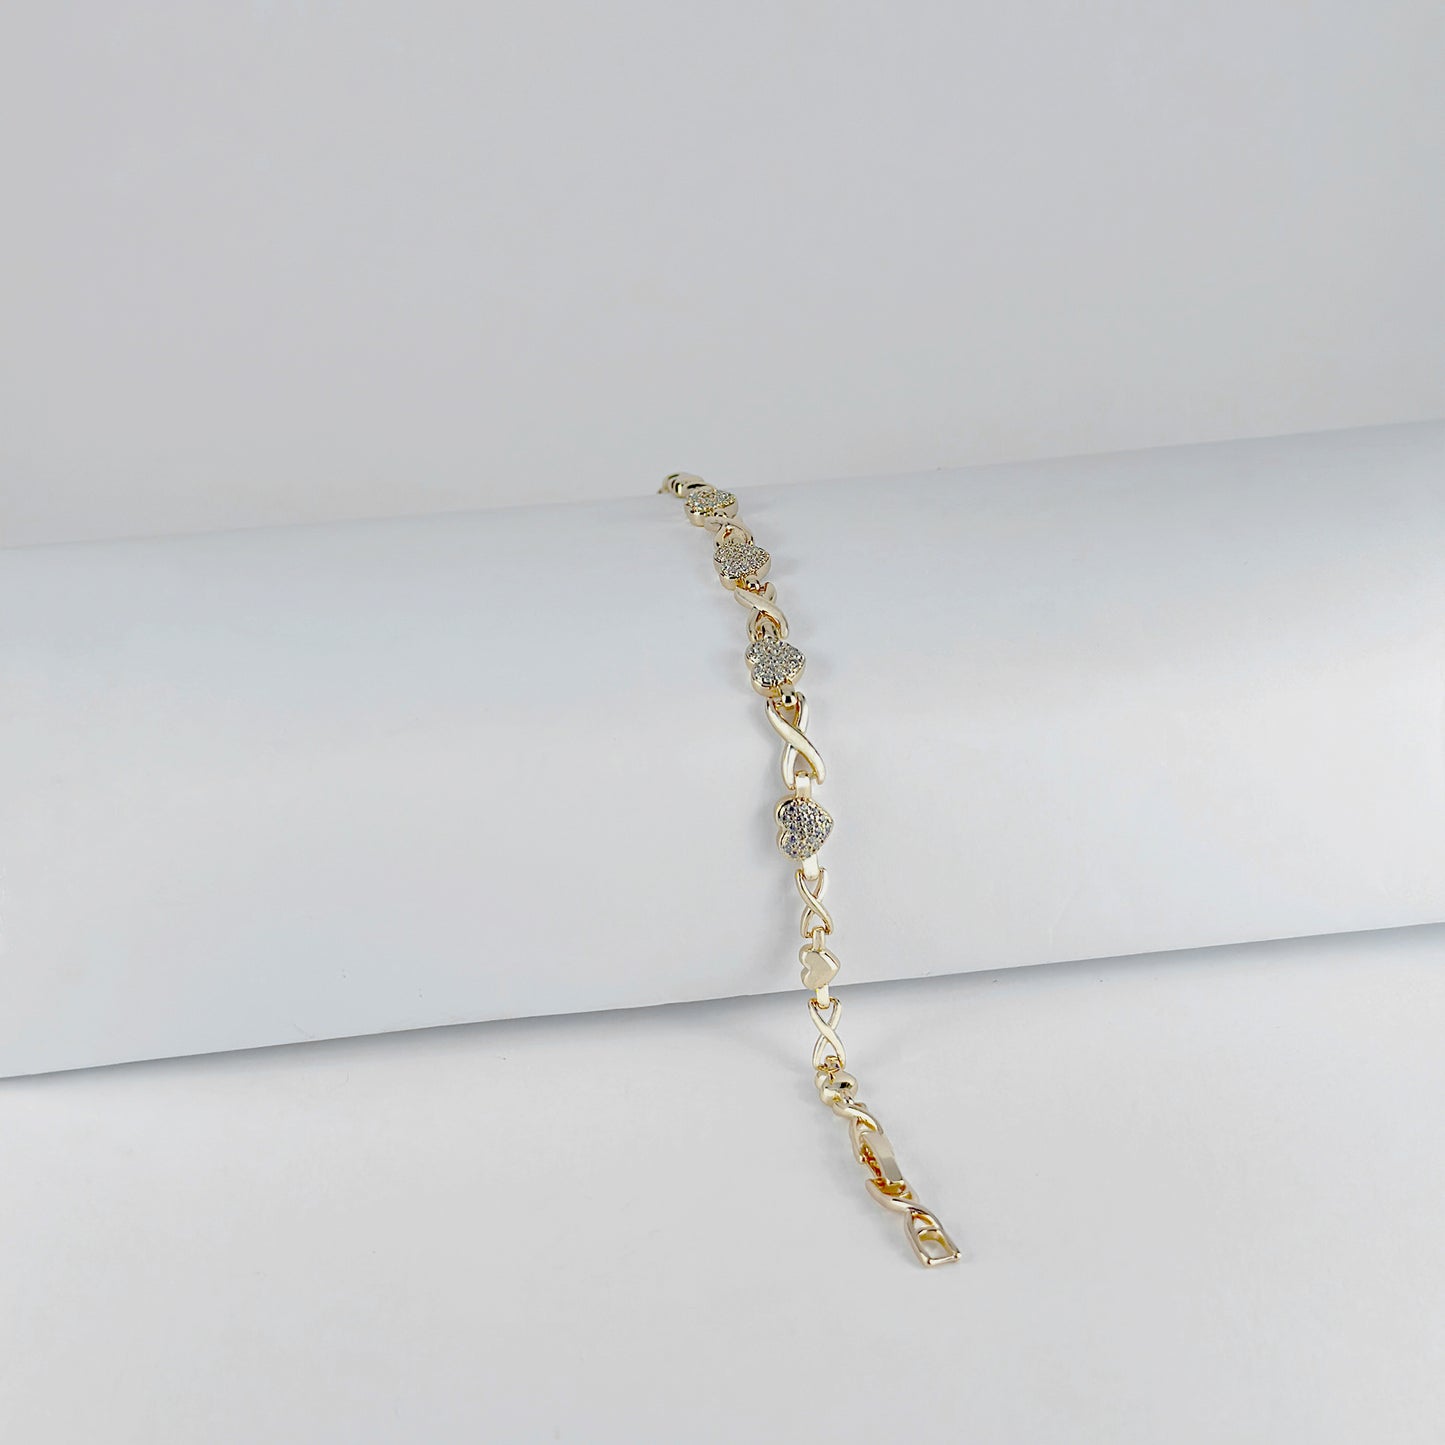 Image of (Golden Hearts Bracelet) from an exquisite collection by Al Musk Jewellery.